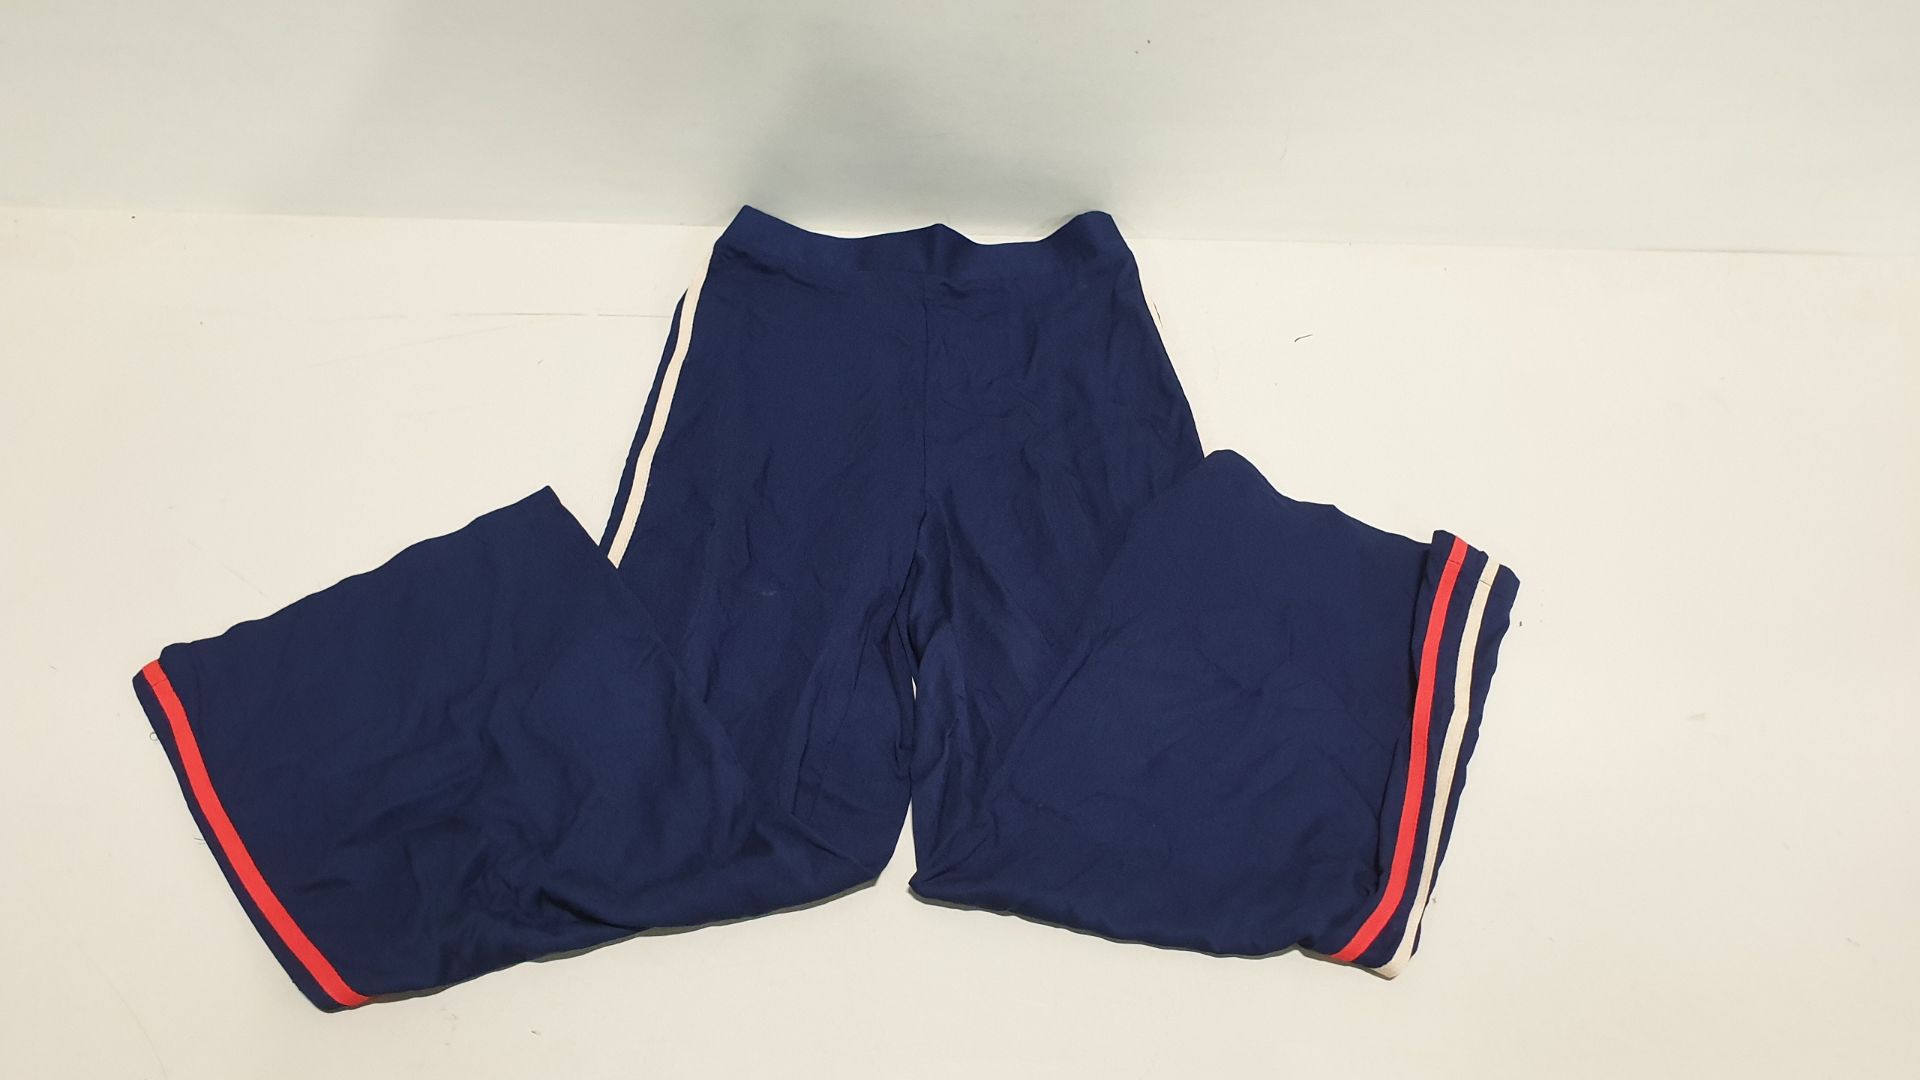 70 X BRAND NEW PAIRS OF DARK BLUE TROUSERS WITH RED STRIPE (AVON CODE F7376000) - SIZE 14-16 - IN